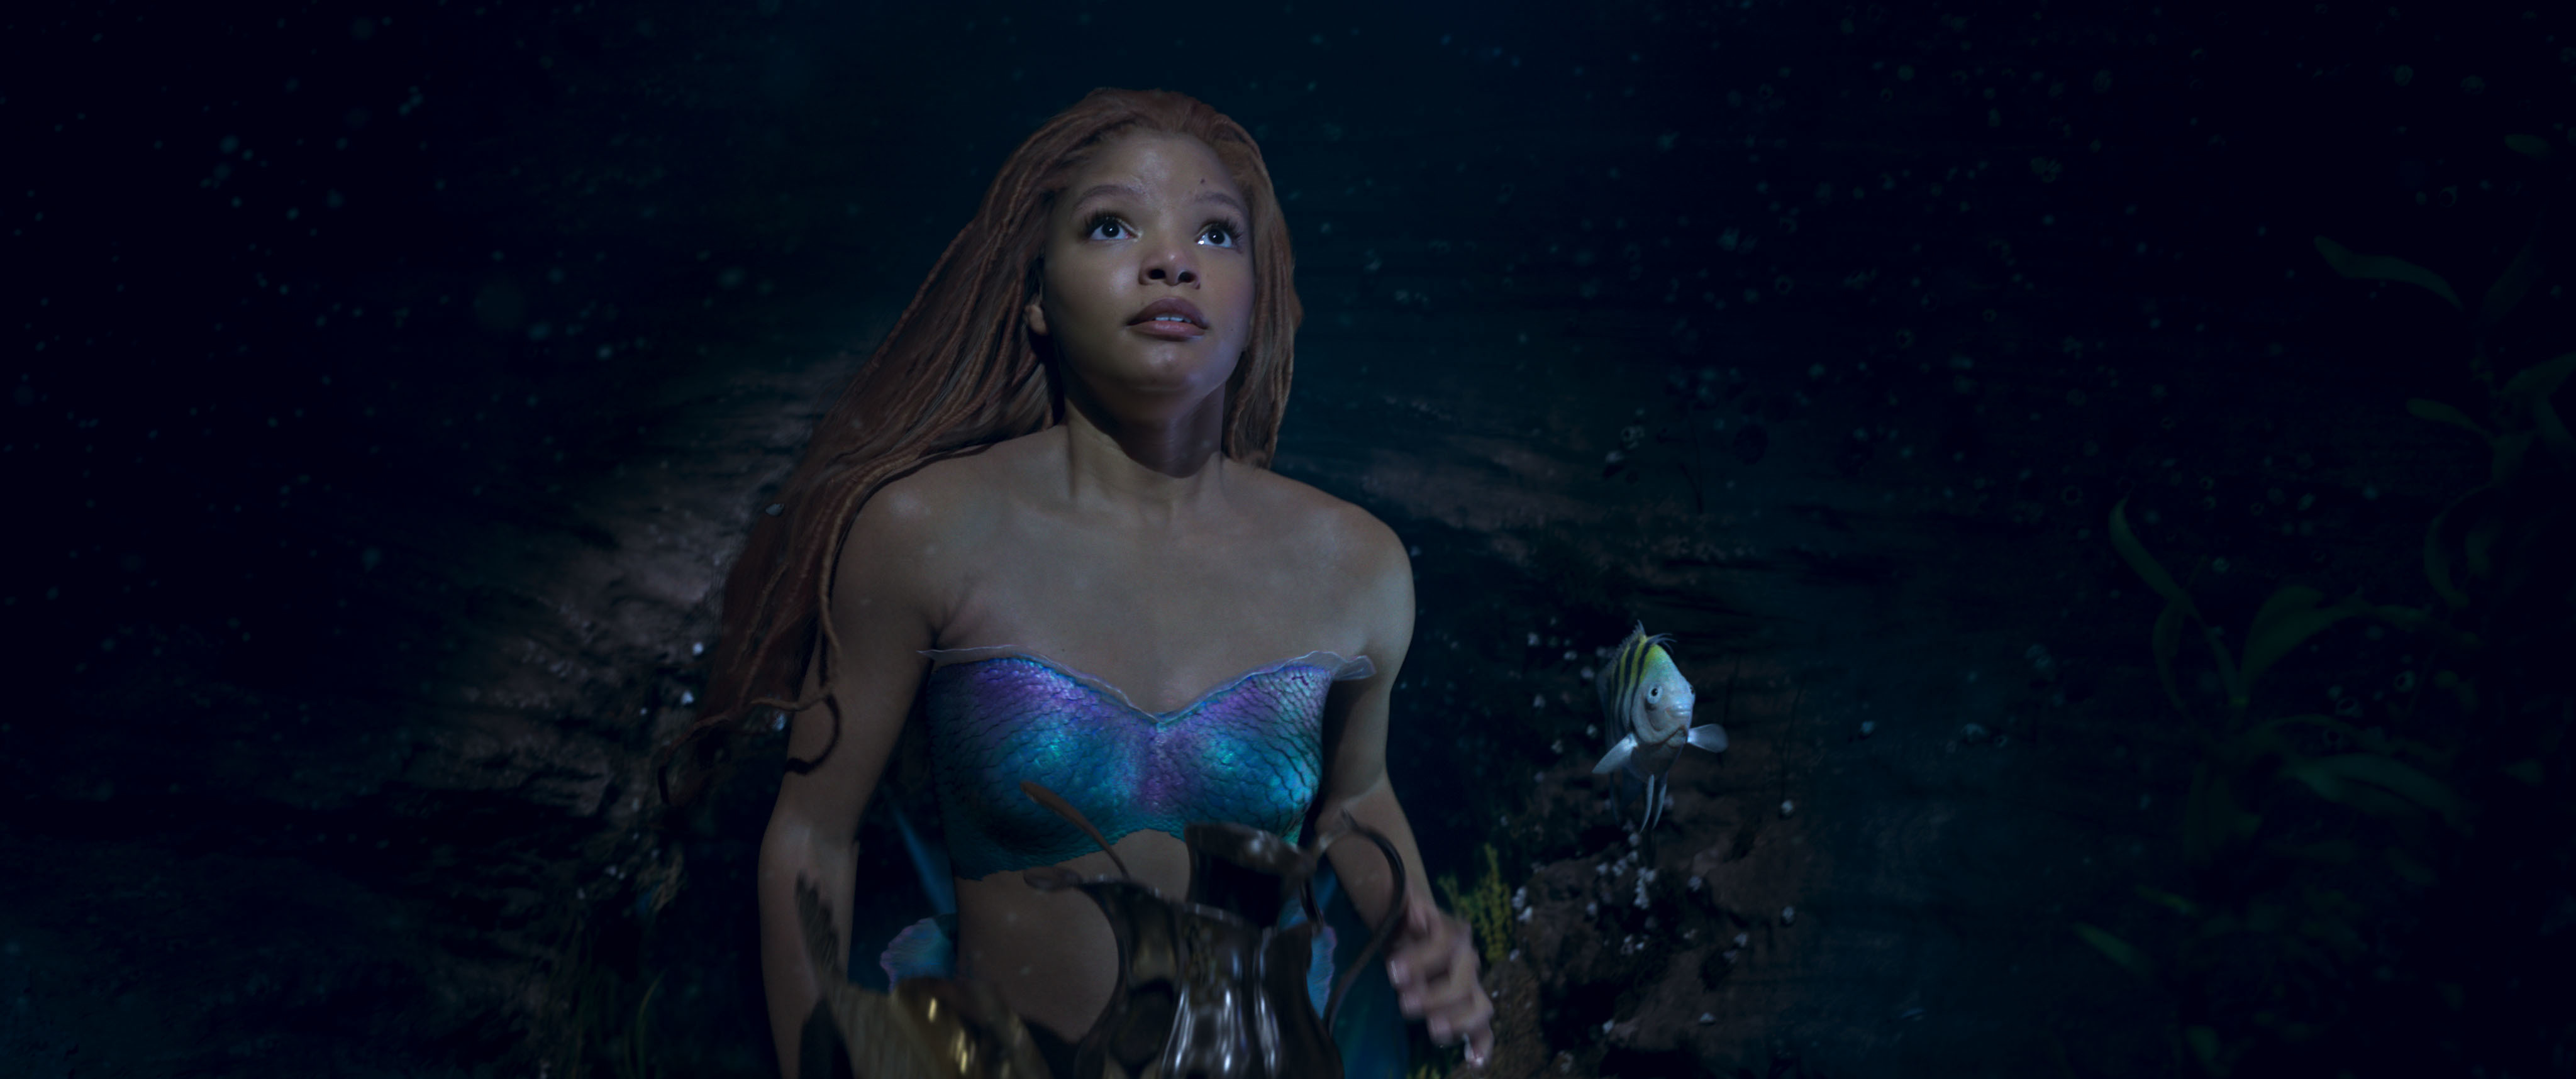 Negative User Reviews Prompt IMDB To Change Rating System For Disney’s ‘The Little Mermaid’